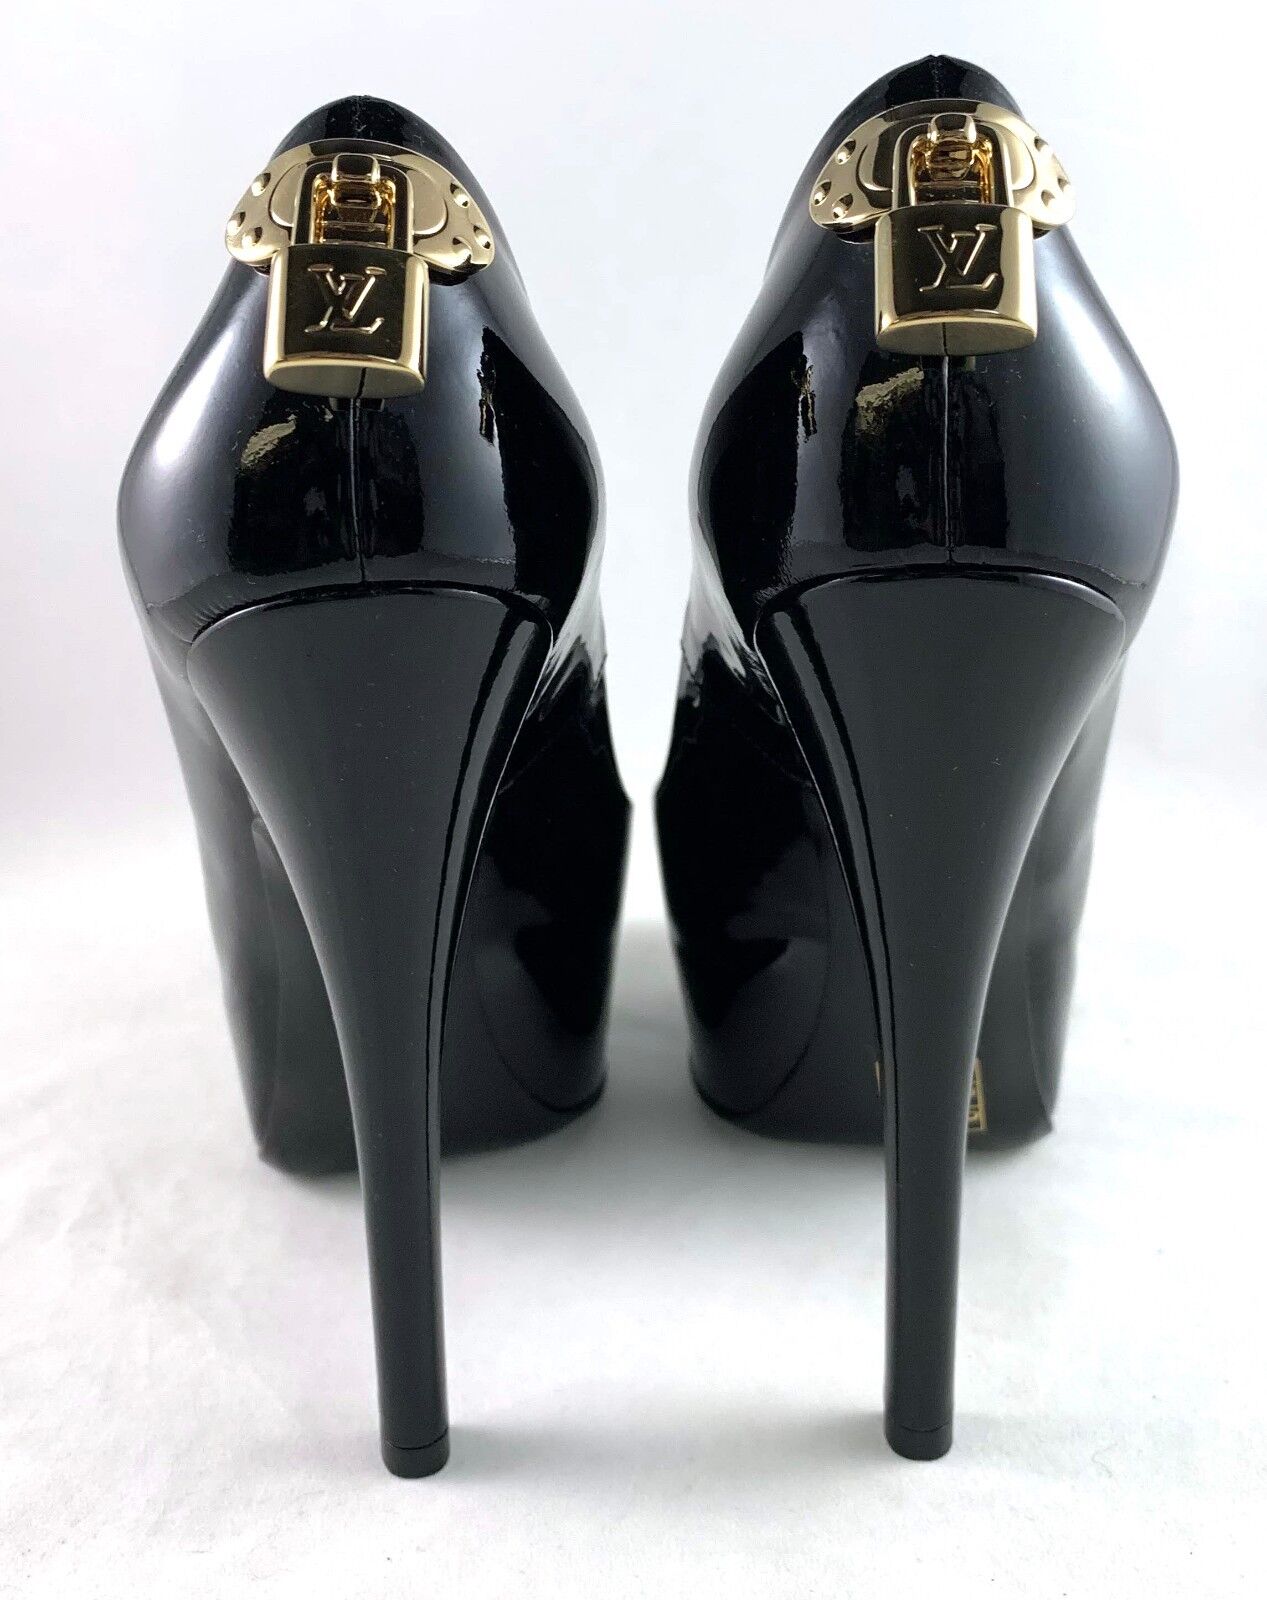 Louis Vuitton “Oh Really” Matte Black Leather Gold Lock Platform Peep Toe  Size 8 - $622 (58% Off Retail) - From Jeremy